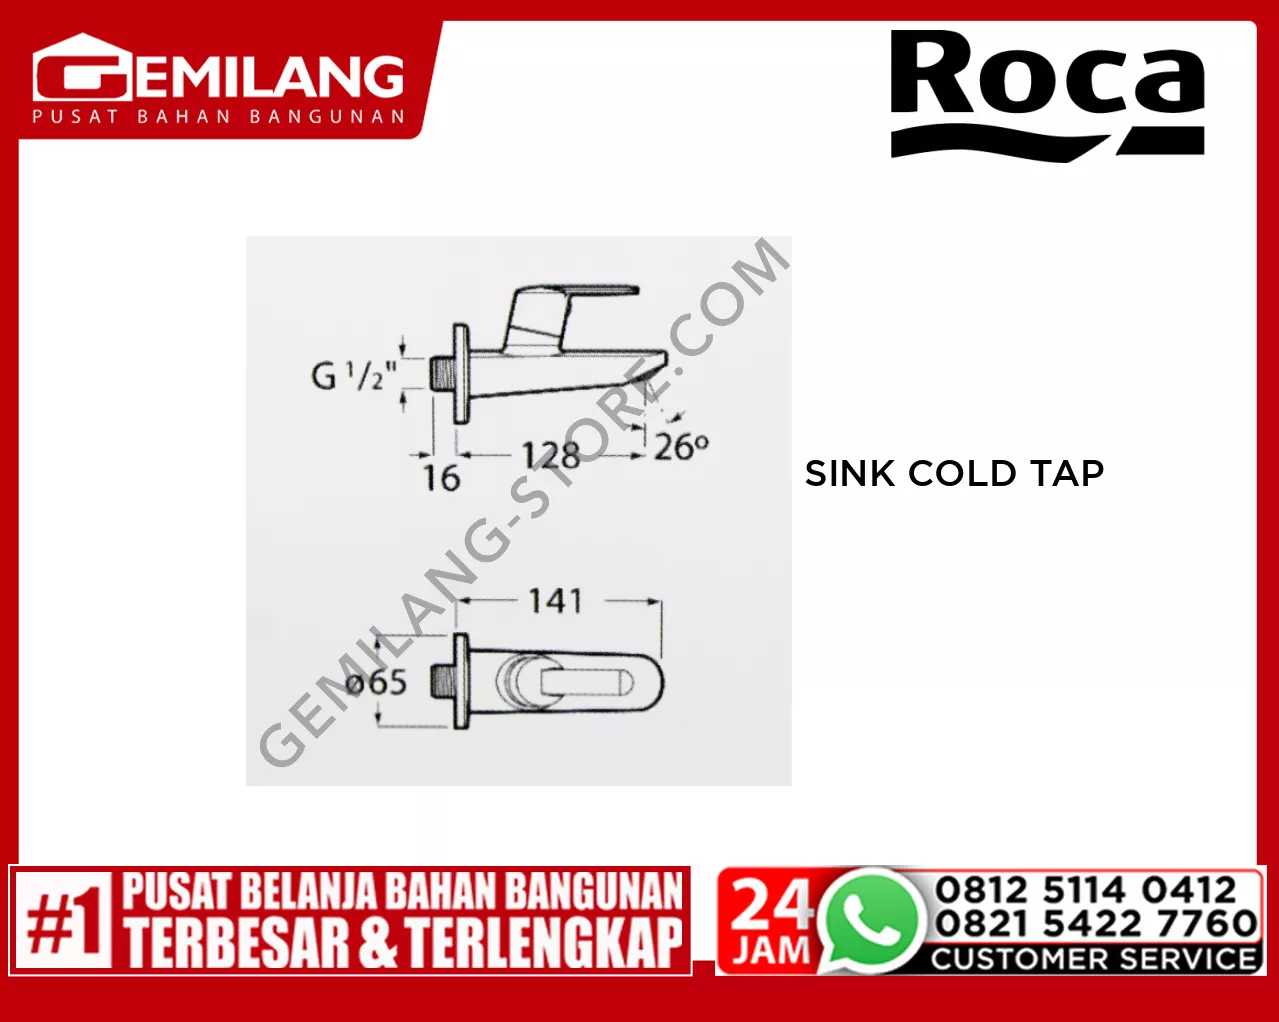 ROCA VICTORIA WALL MOUNTED SINK COLD TAP FRCSF-ST-A5A7825C0V